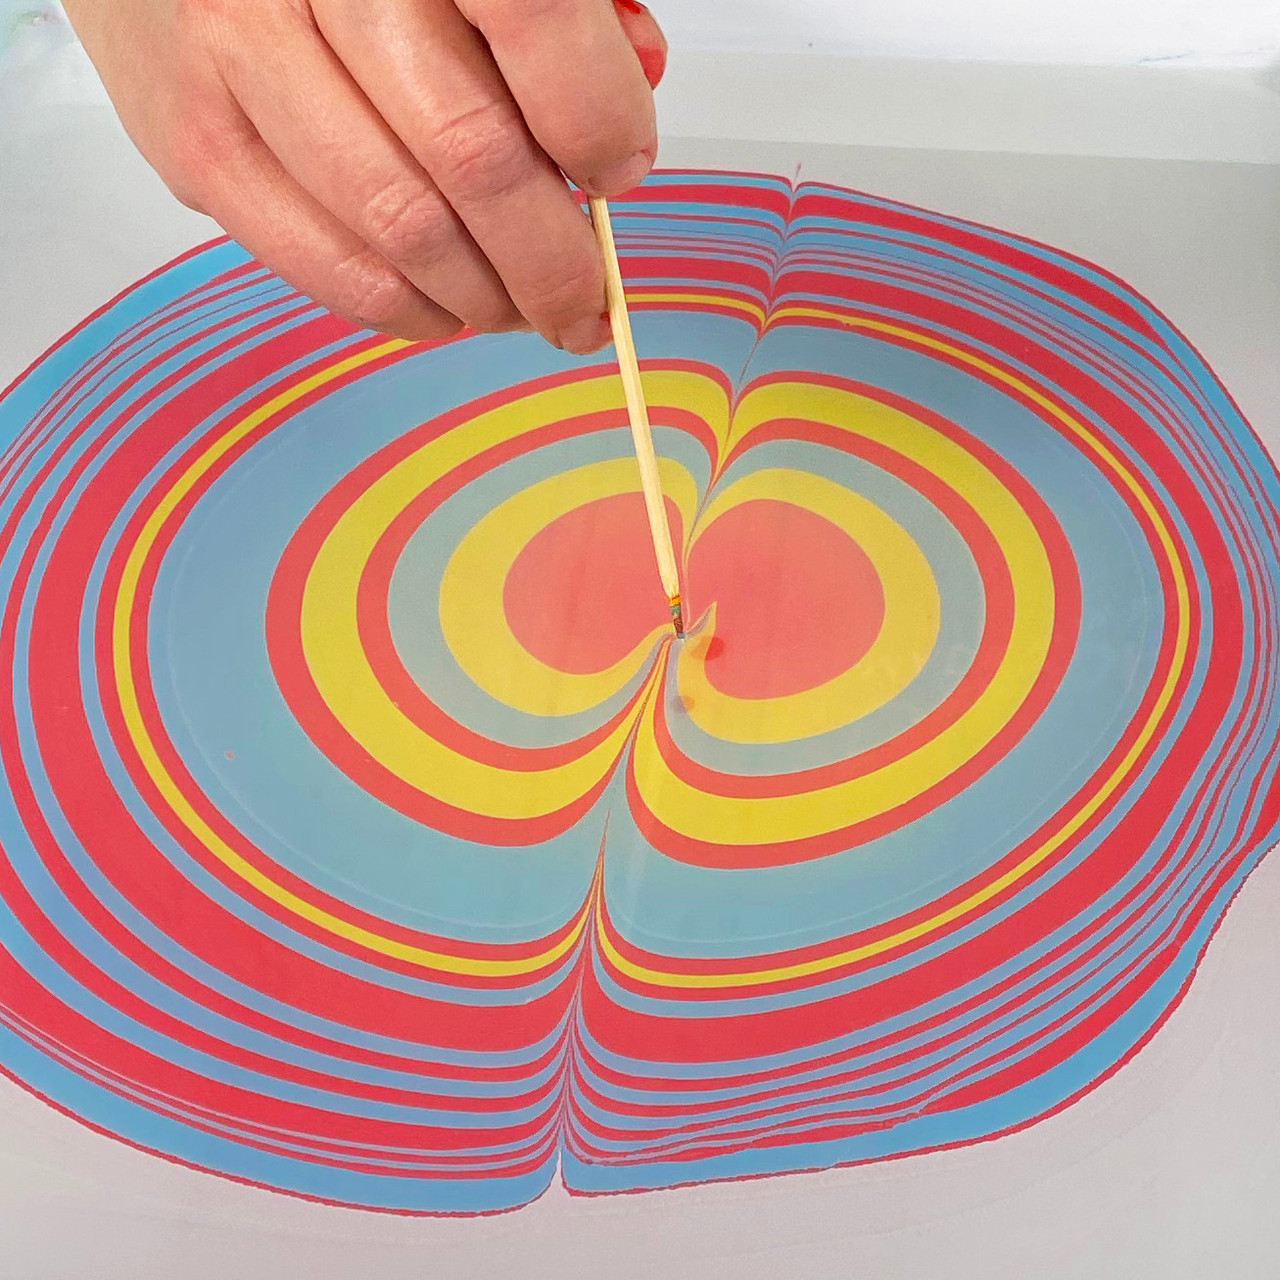 Oil Paint and Water Marbled Mats - Infarrantly Creative